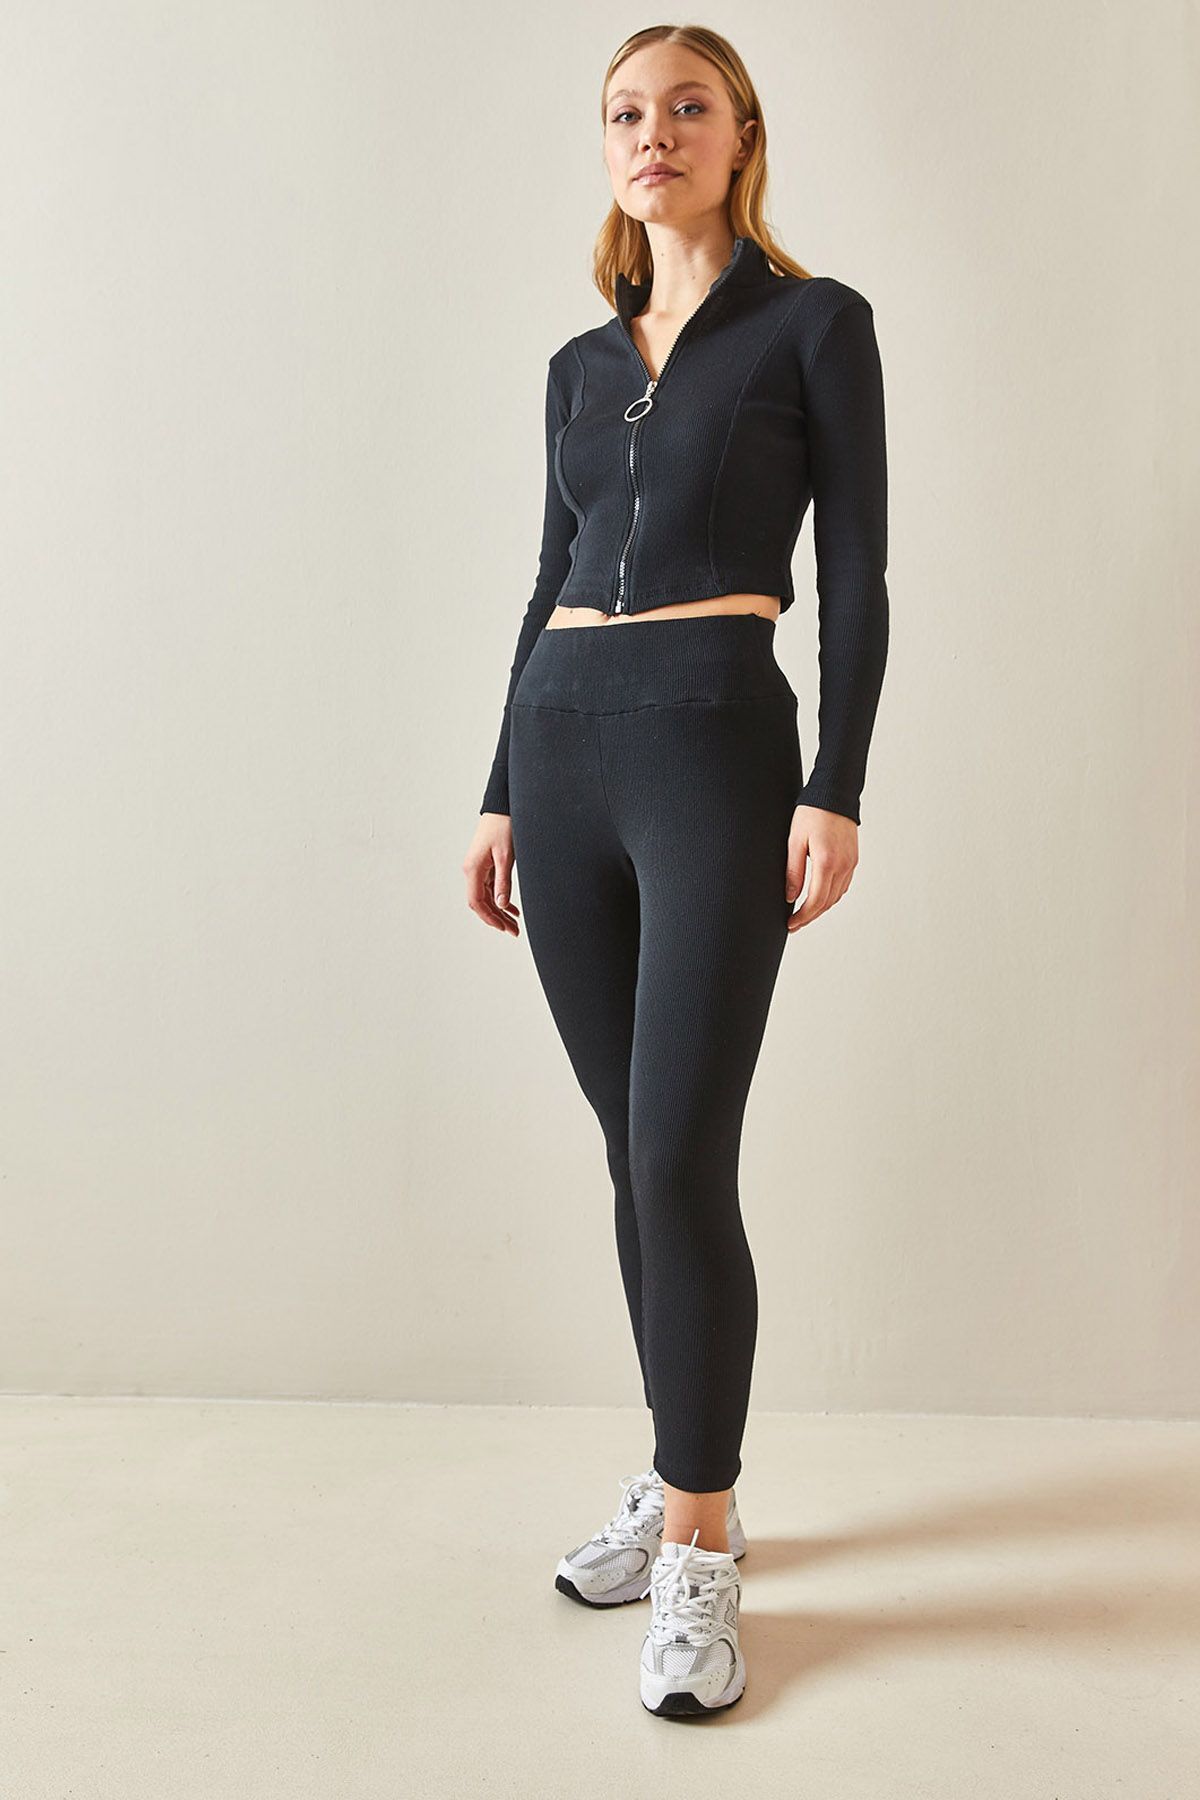 XHAN Black Zippered Camisole Suit